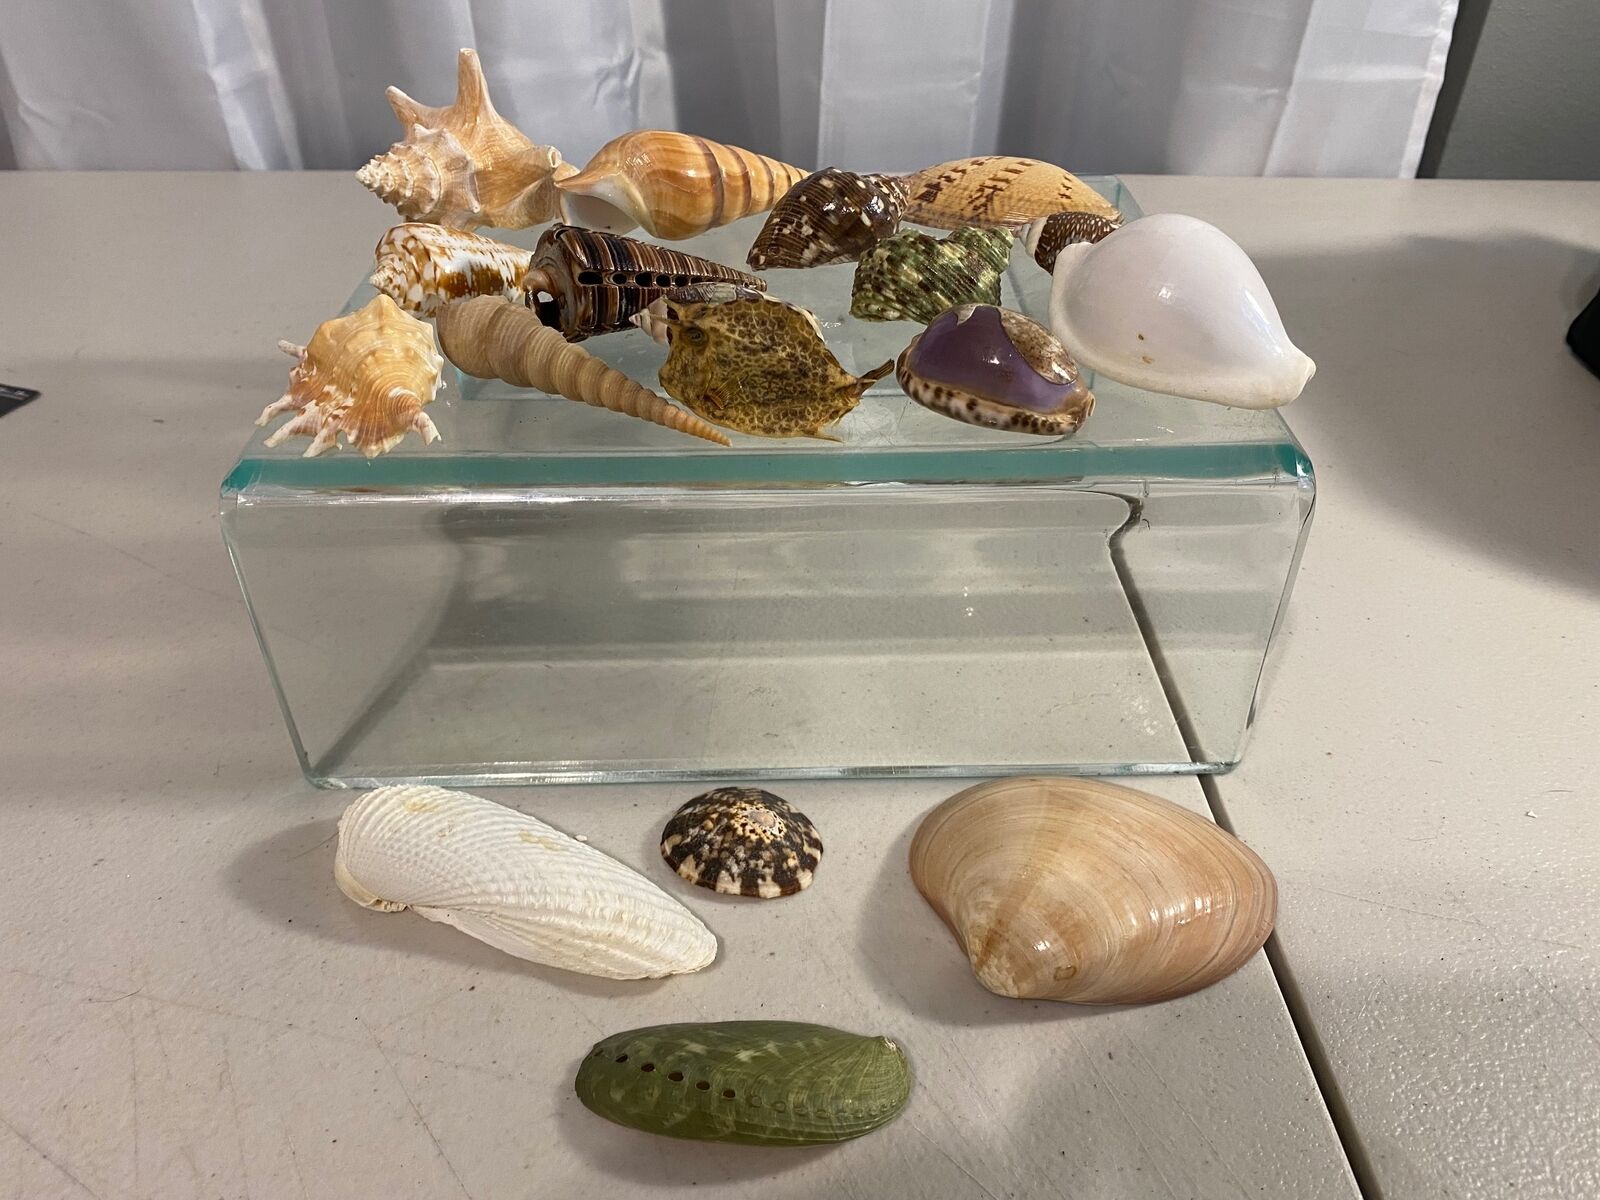 Lot Containing 16 Assorted Shells and a Small Dry Puffer Fish